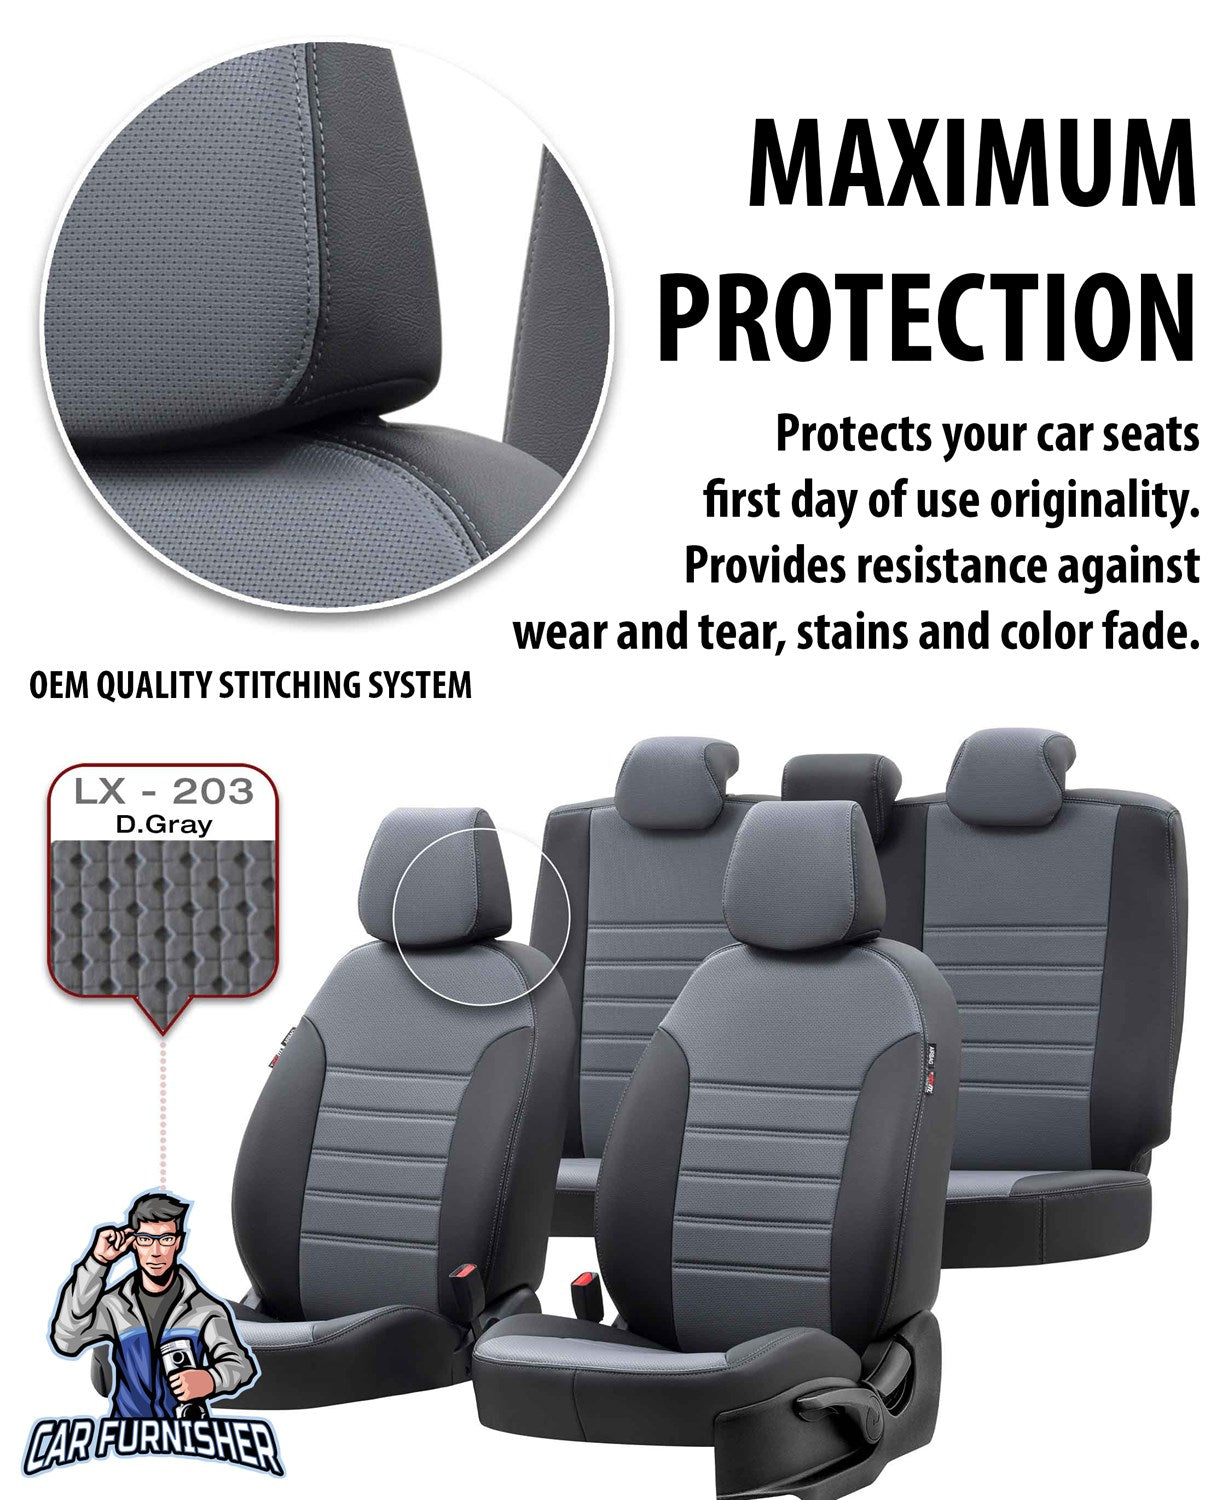 Citroen Jumpy Seat Covers New York Leather Design Black Leather